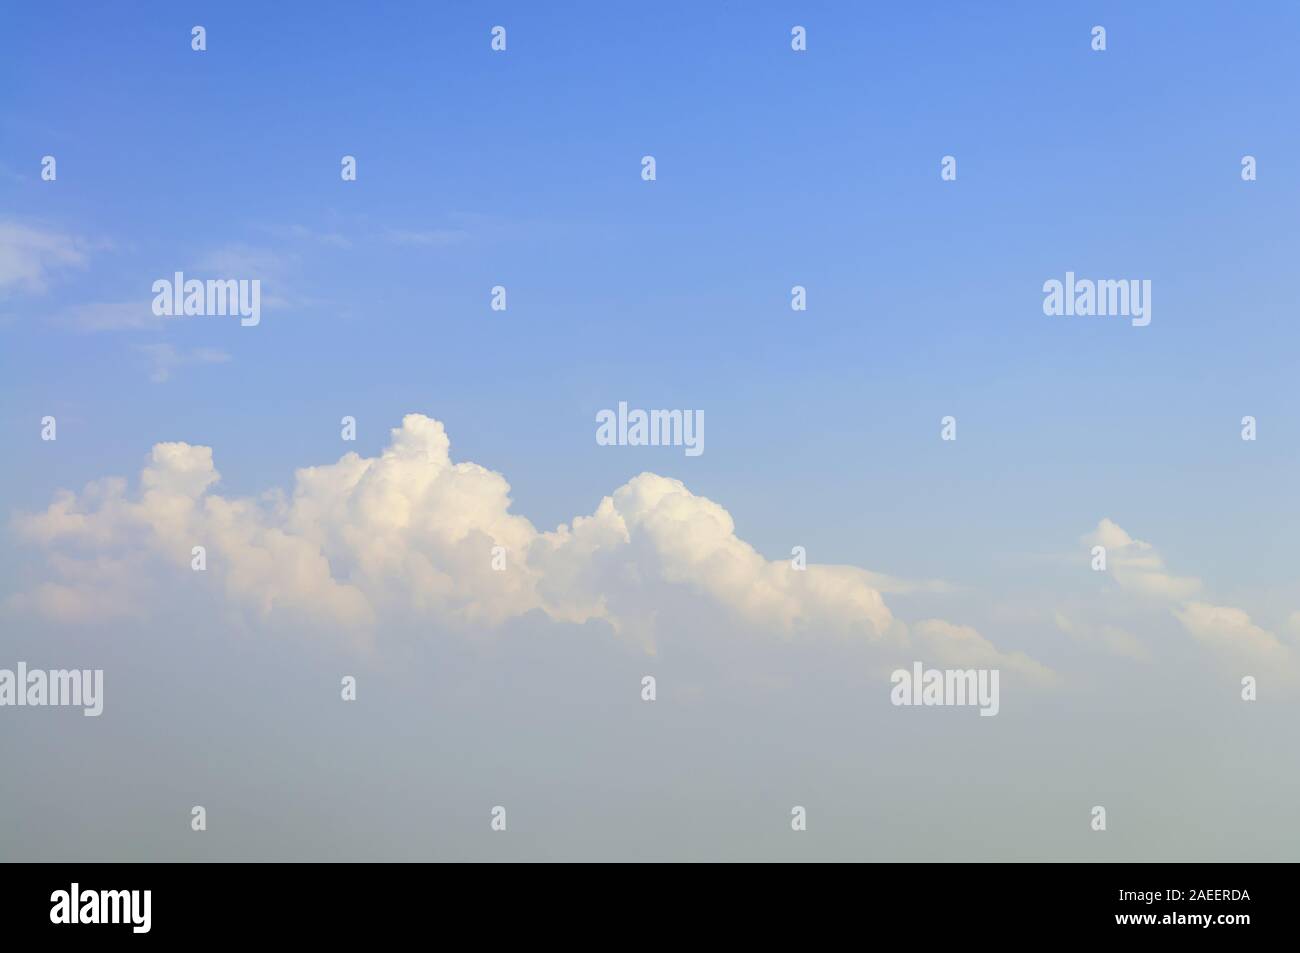 Blue sky and soft clouds beautiful nature background Stock Photo